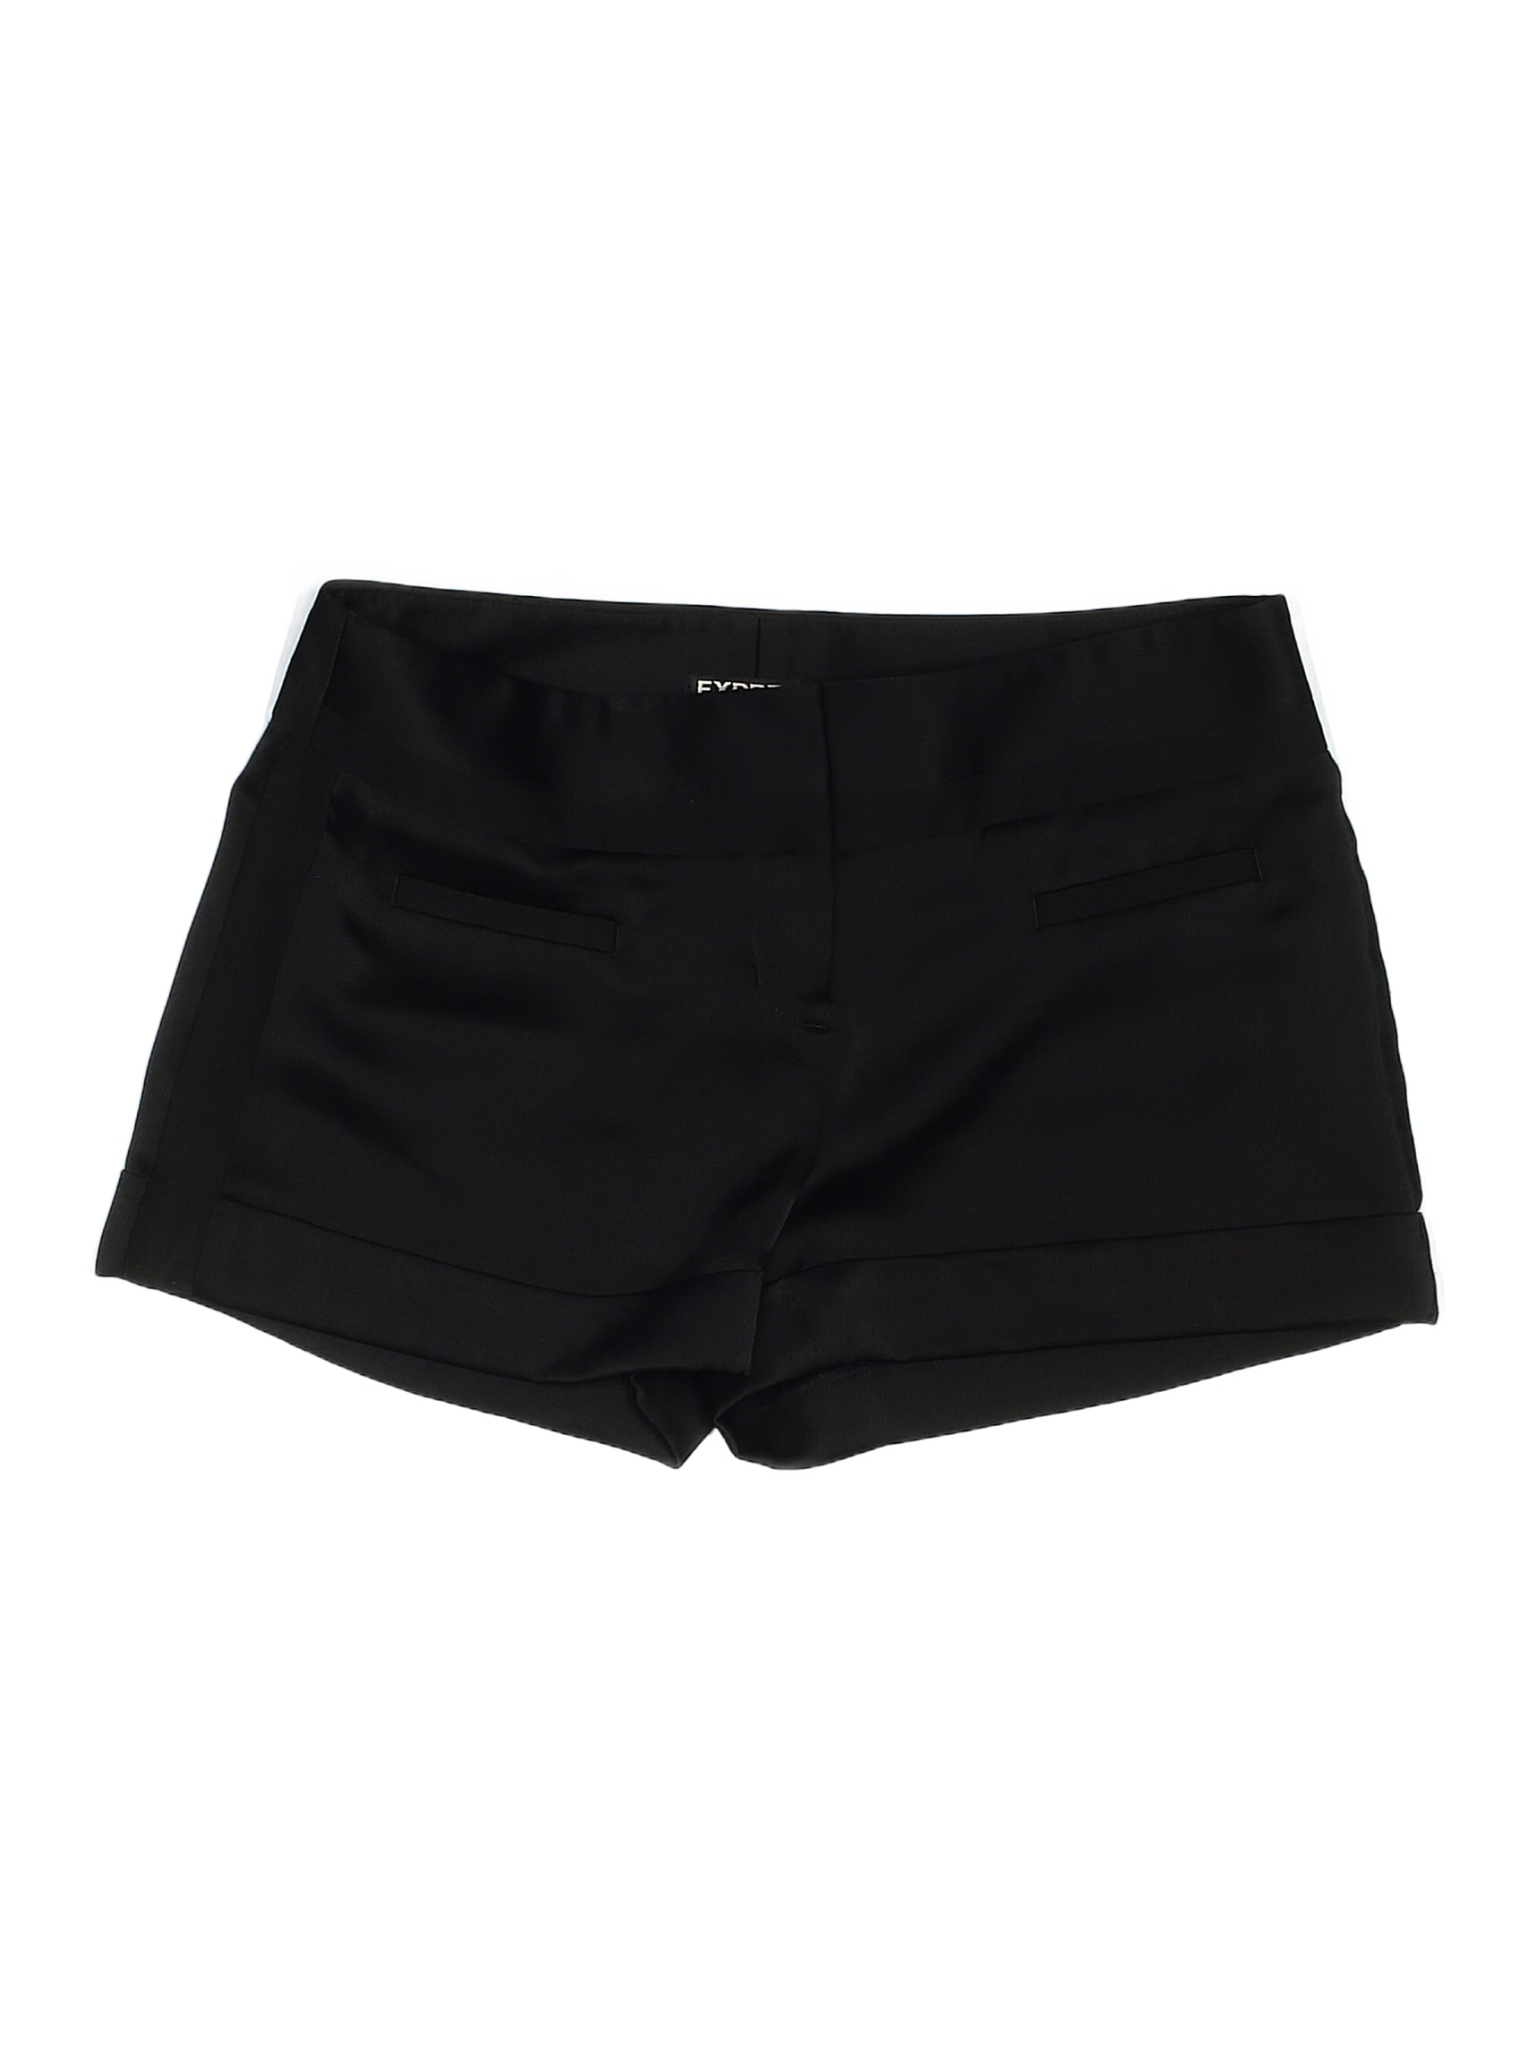 Express 100% Polyester Solid Black Dressy Shorts Size 00 - 73% off ...